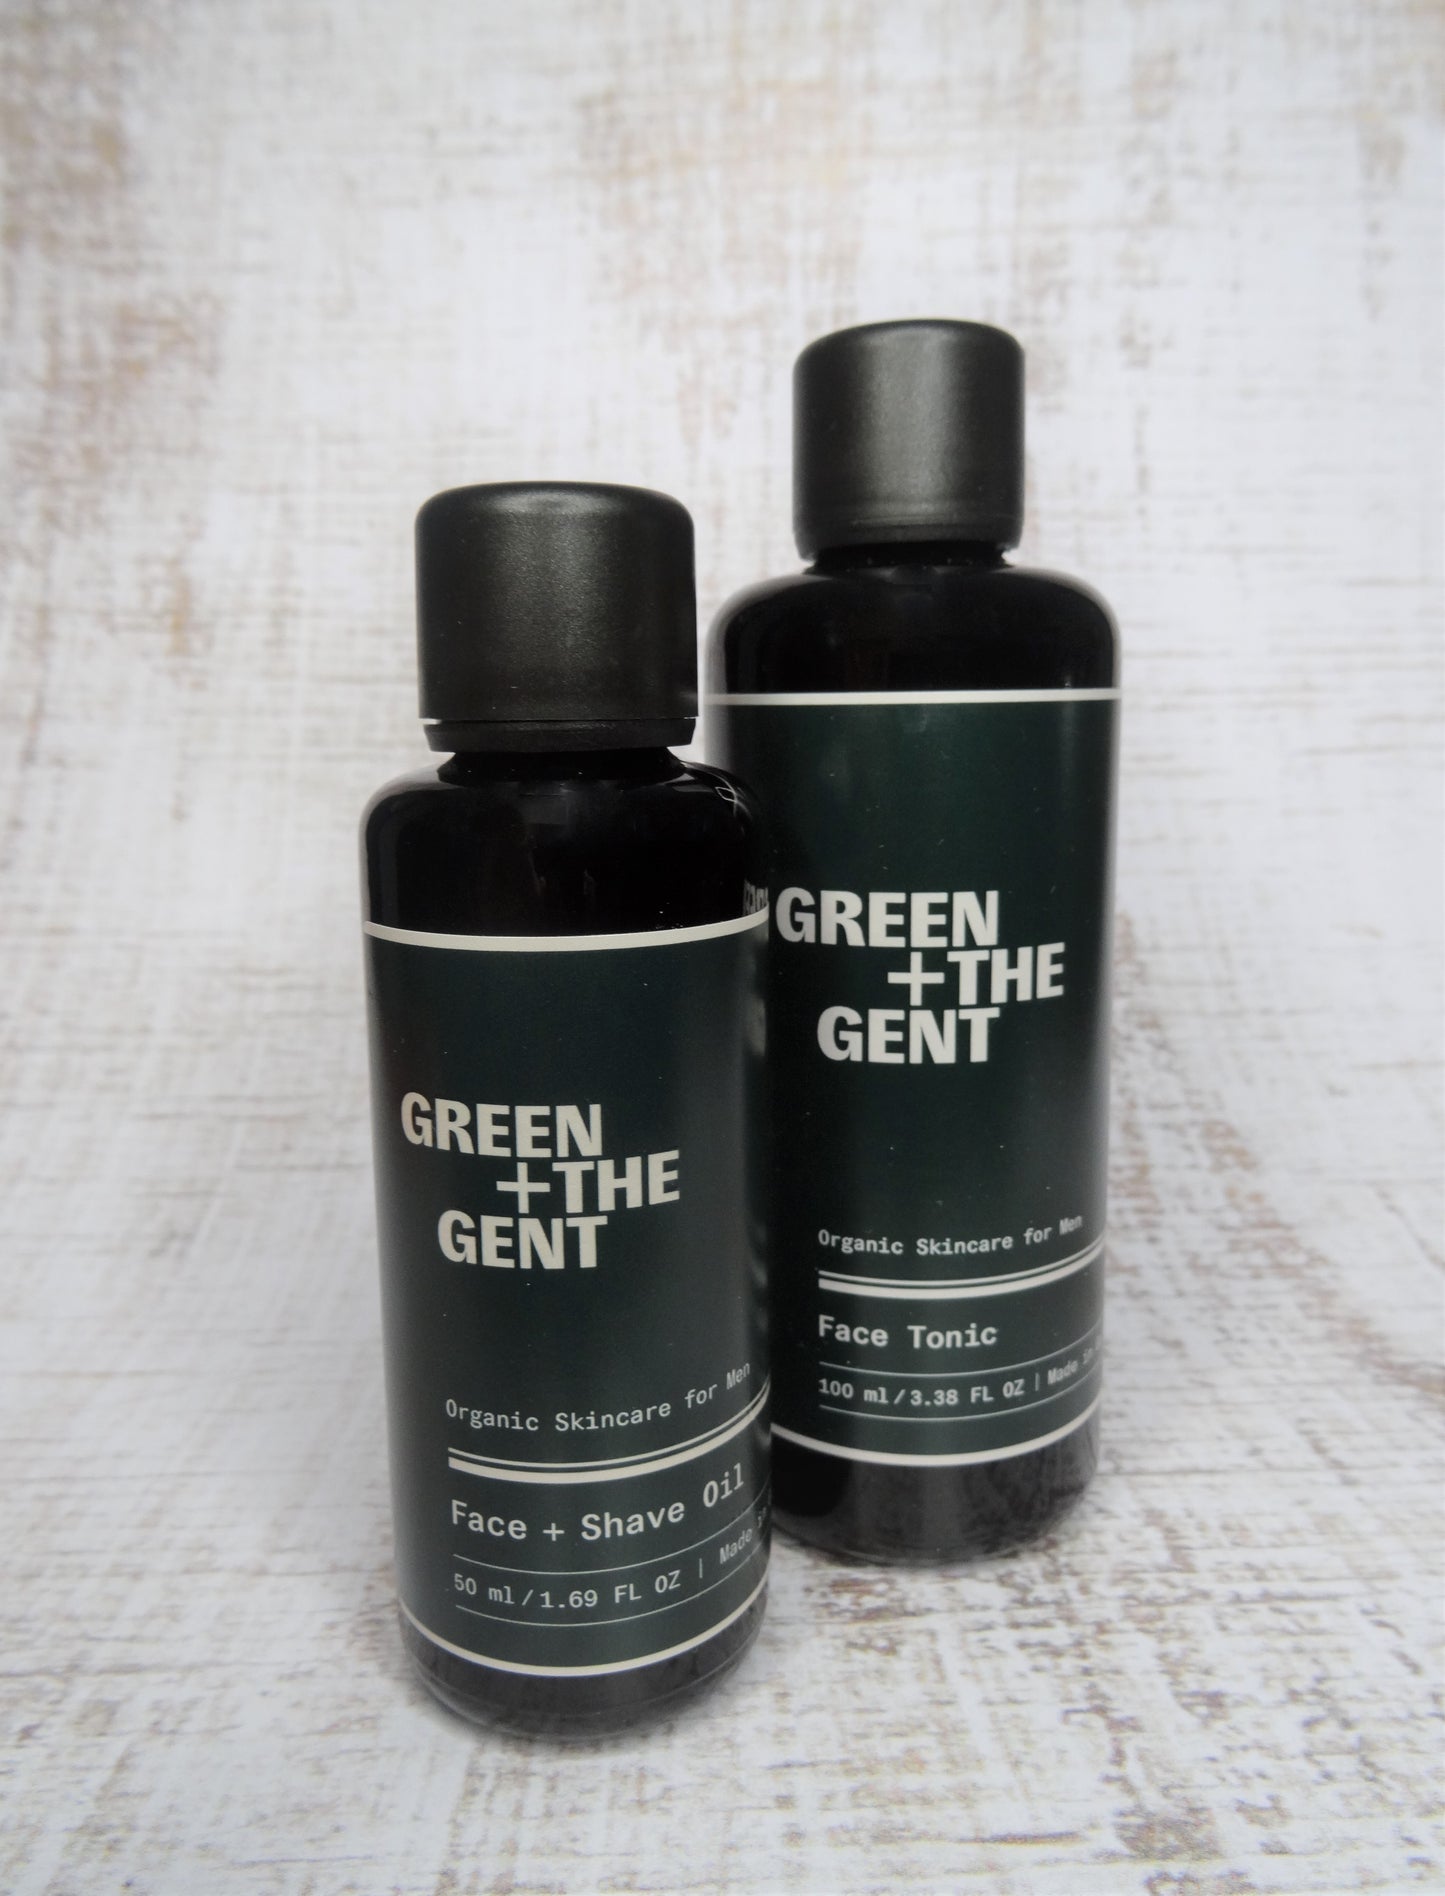 The Shaving Bundle by Green + The Gent